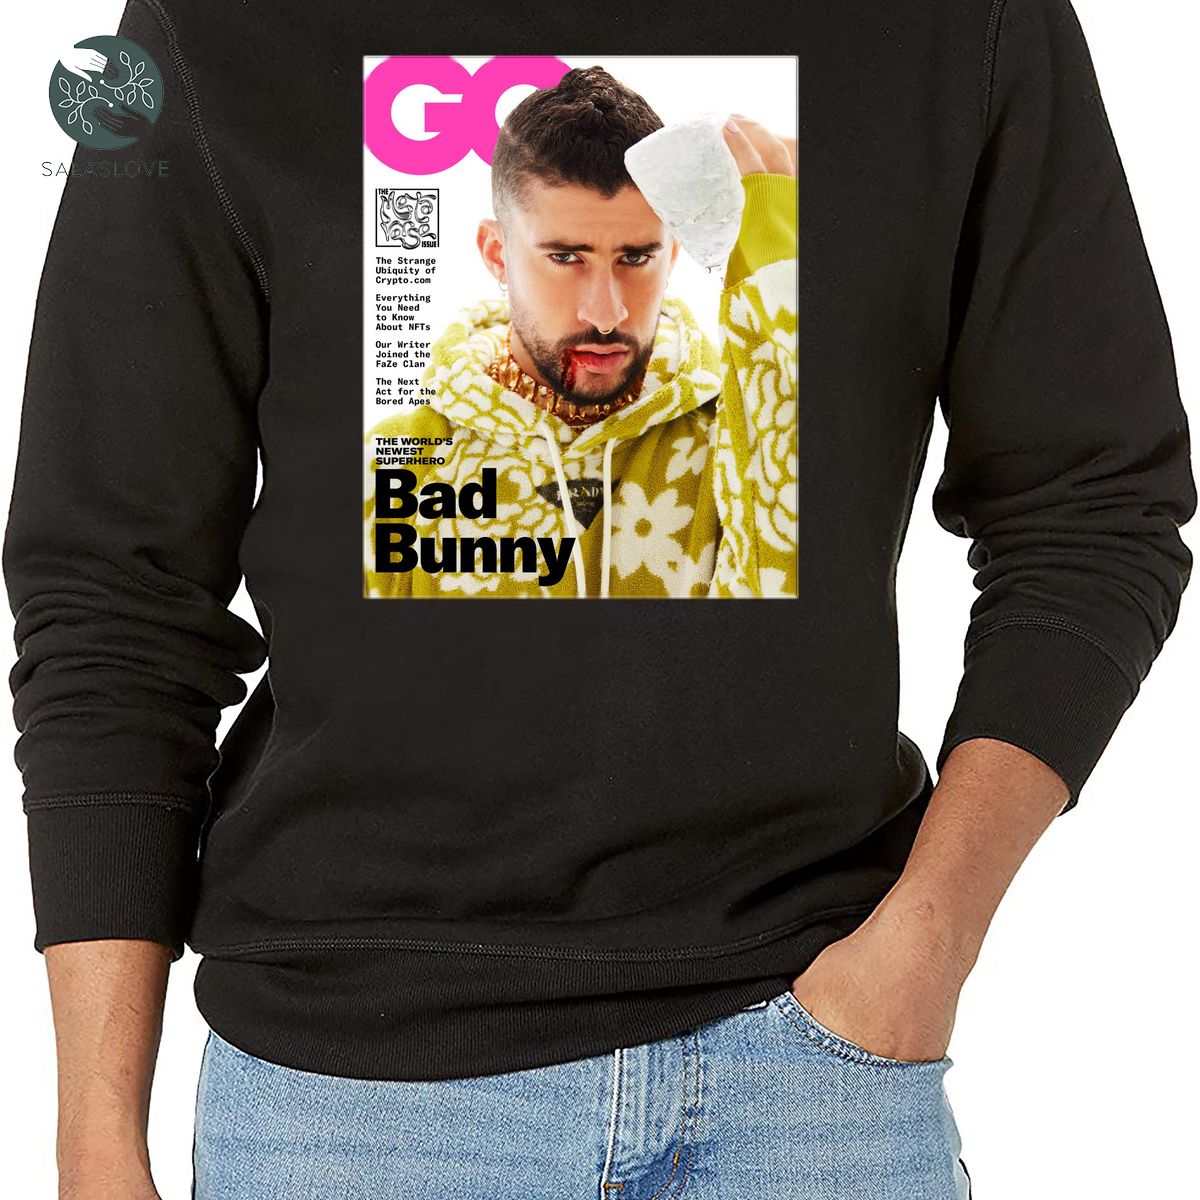 Bad Bunny New Shirt Gift For Fan